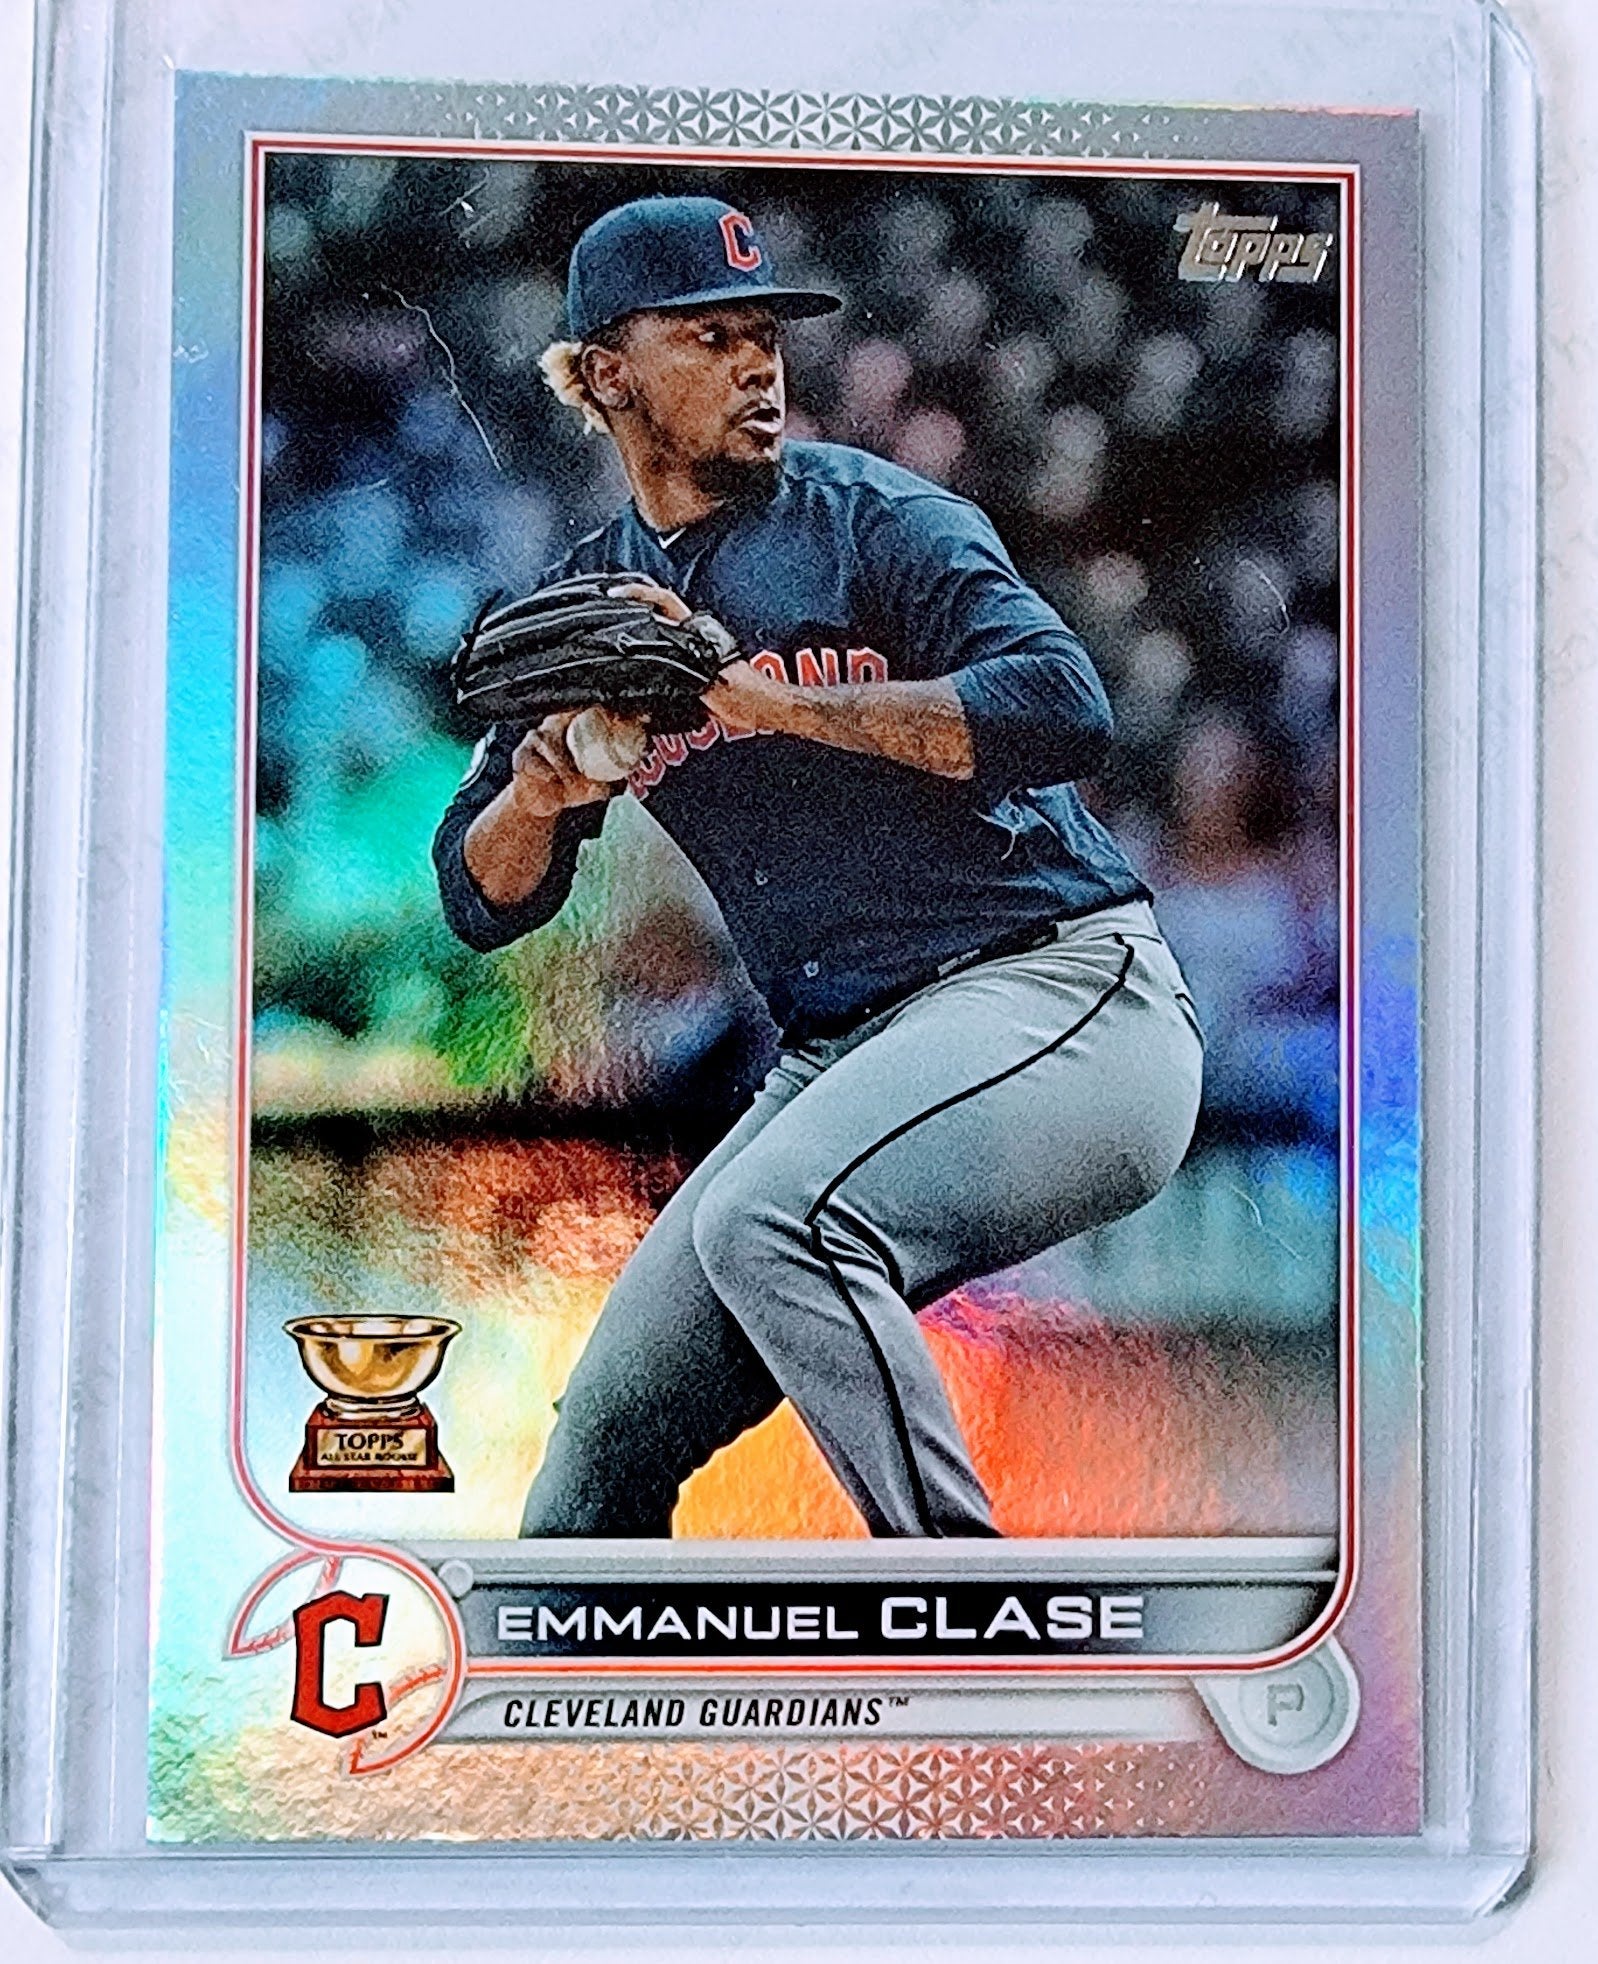 2022 Topps Emmanuel Clase All Star Rookie Cup Rainbow Foil Refractor Baseball Trading Card GRB1 simple Xclusive Collectibles   